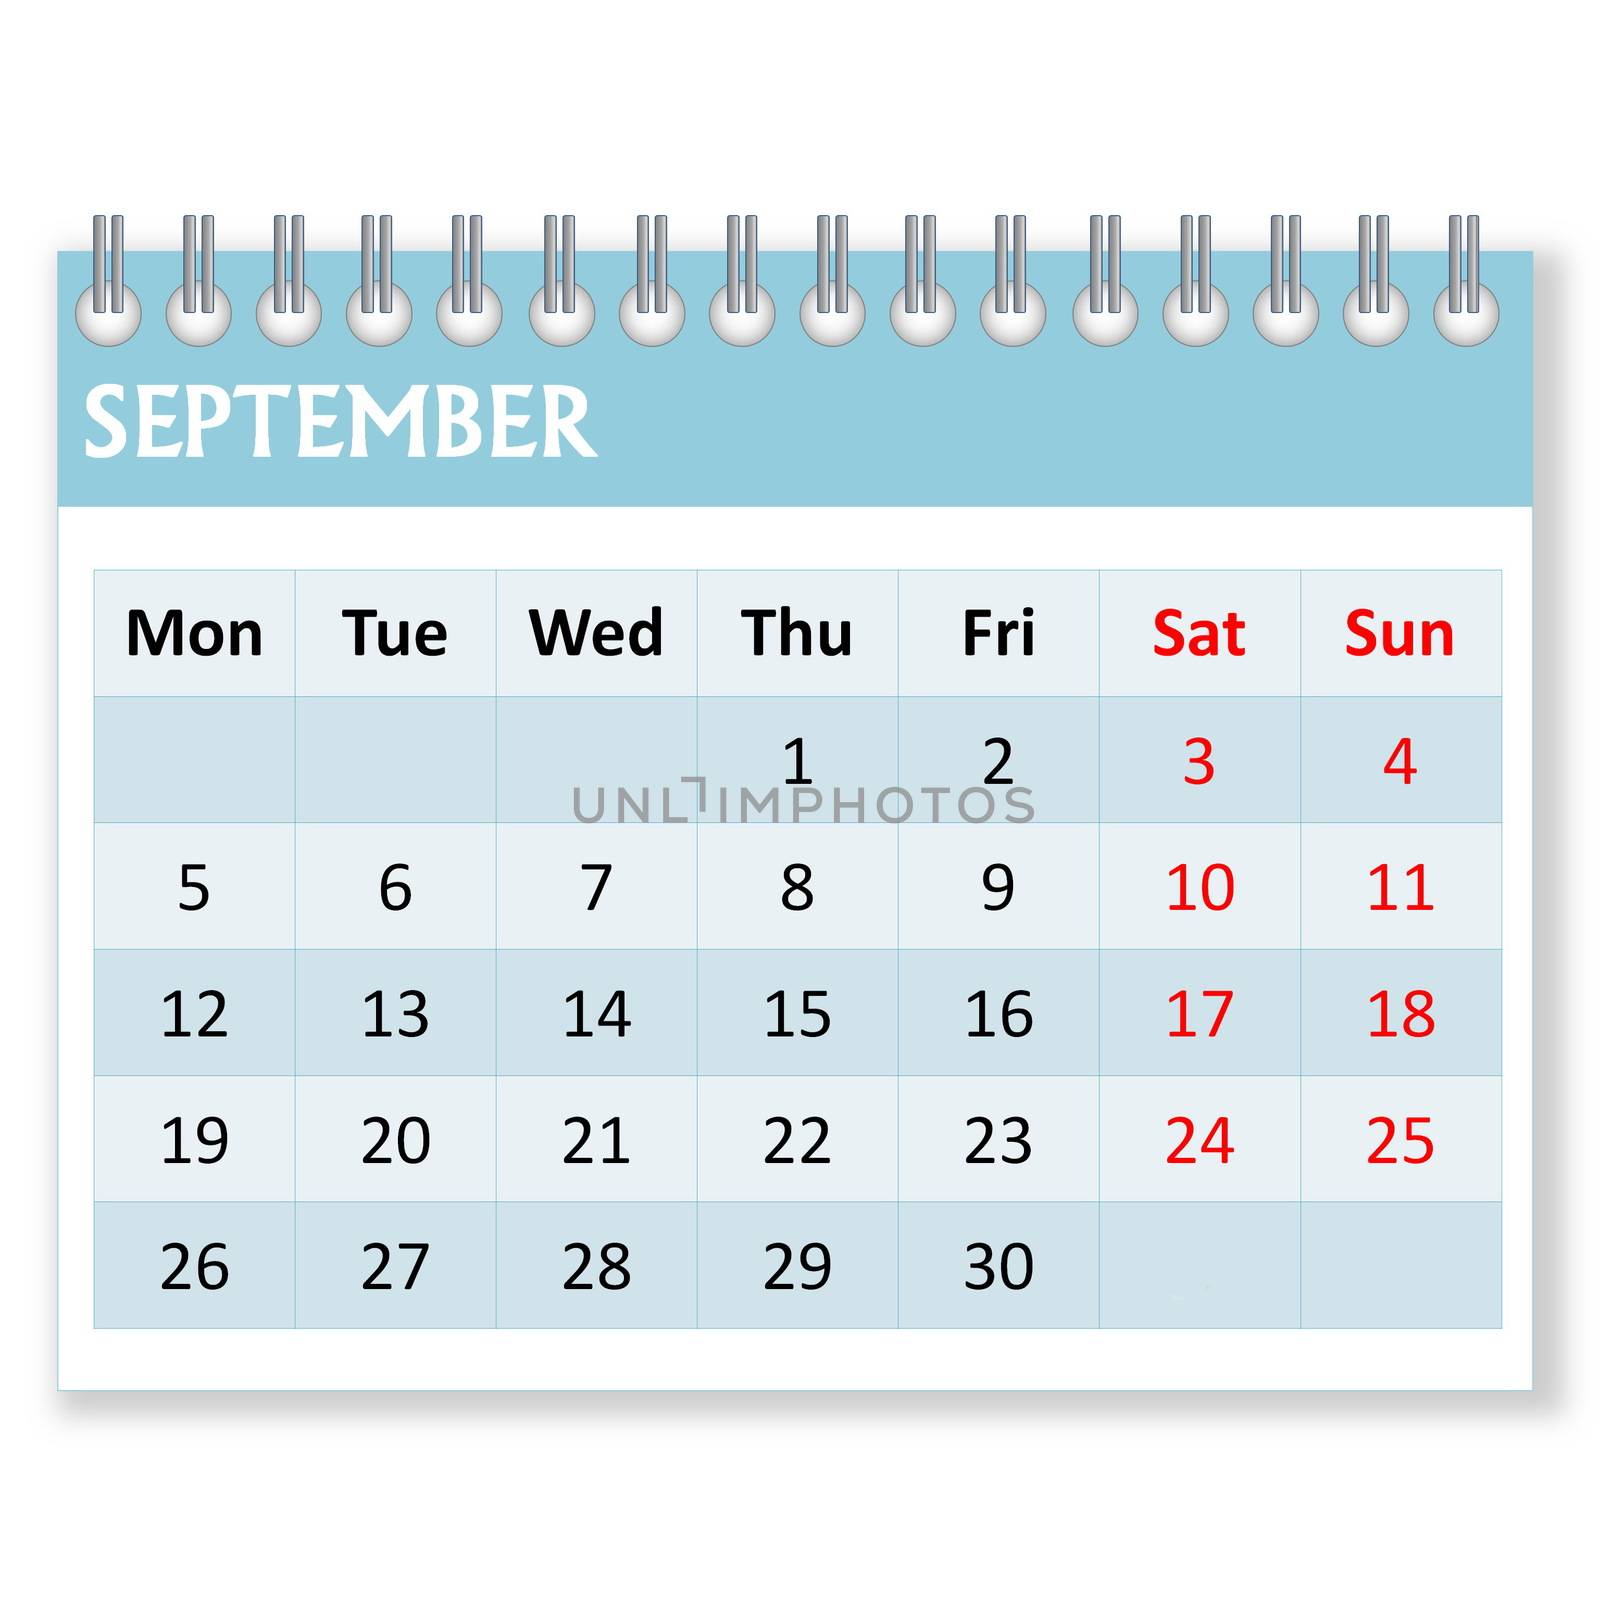 Calendar sheet for september month in white background, week starts from monday